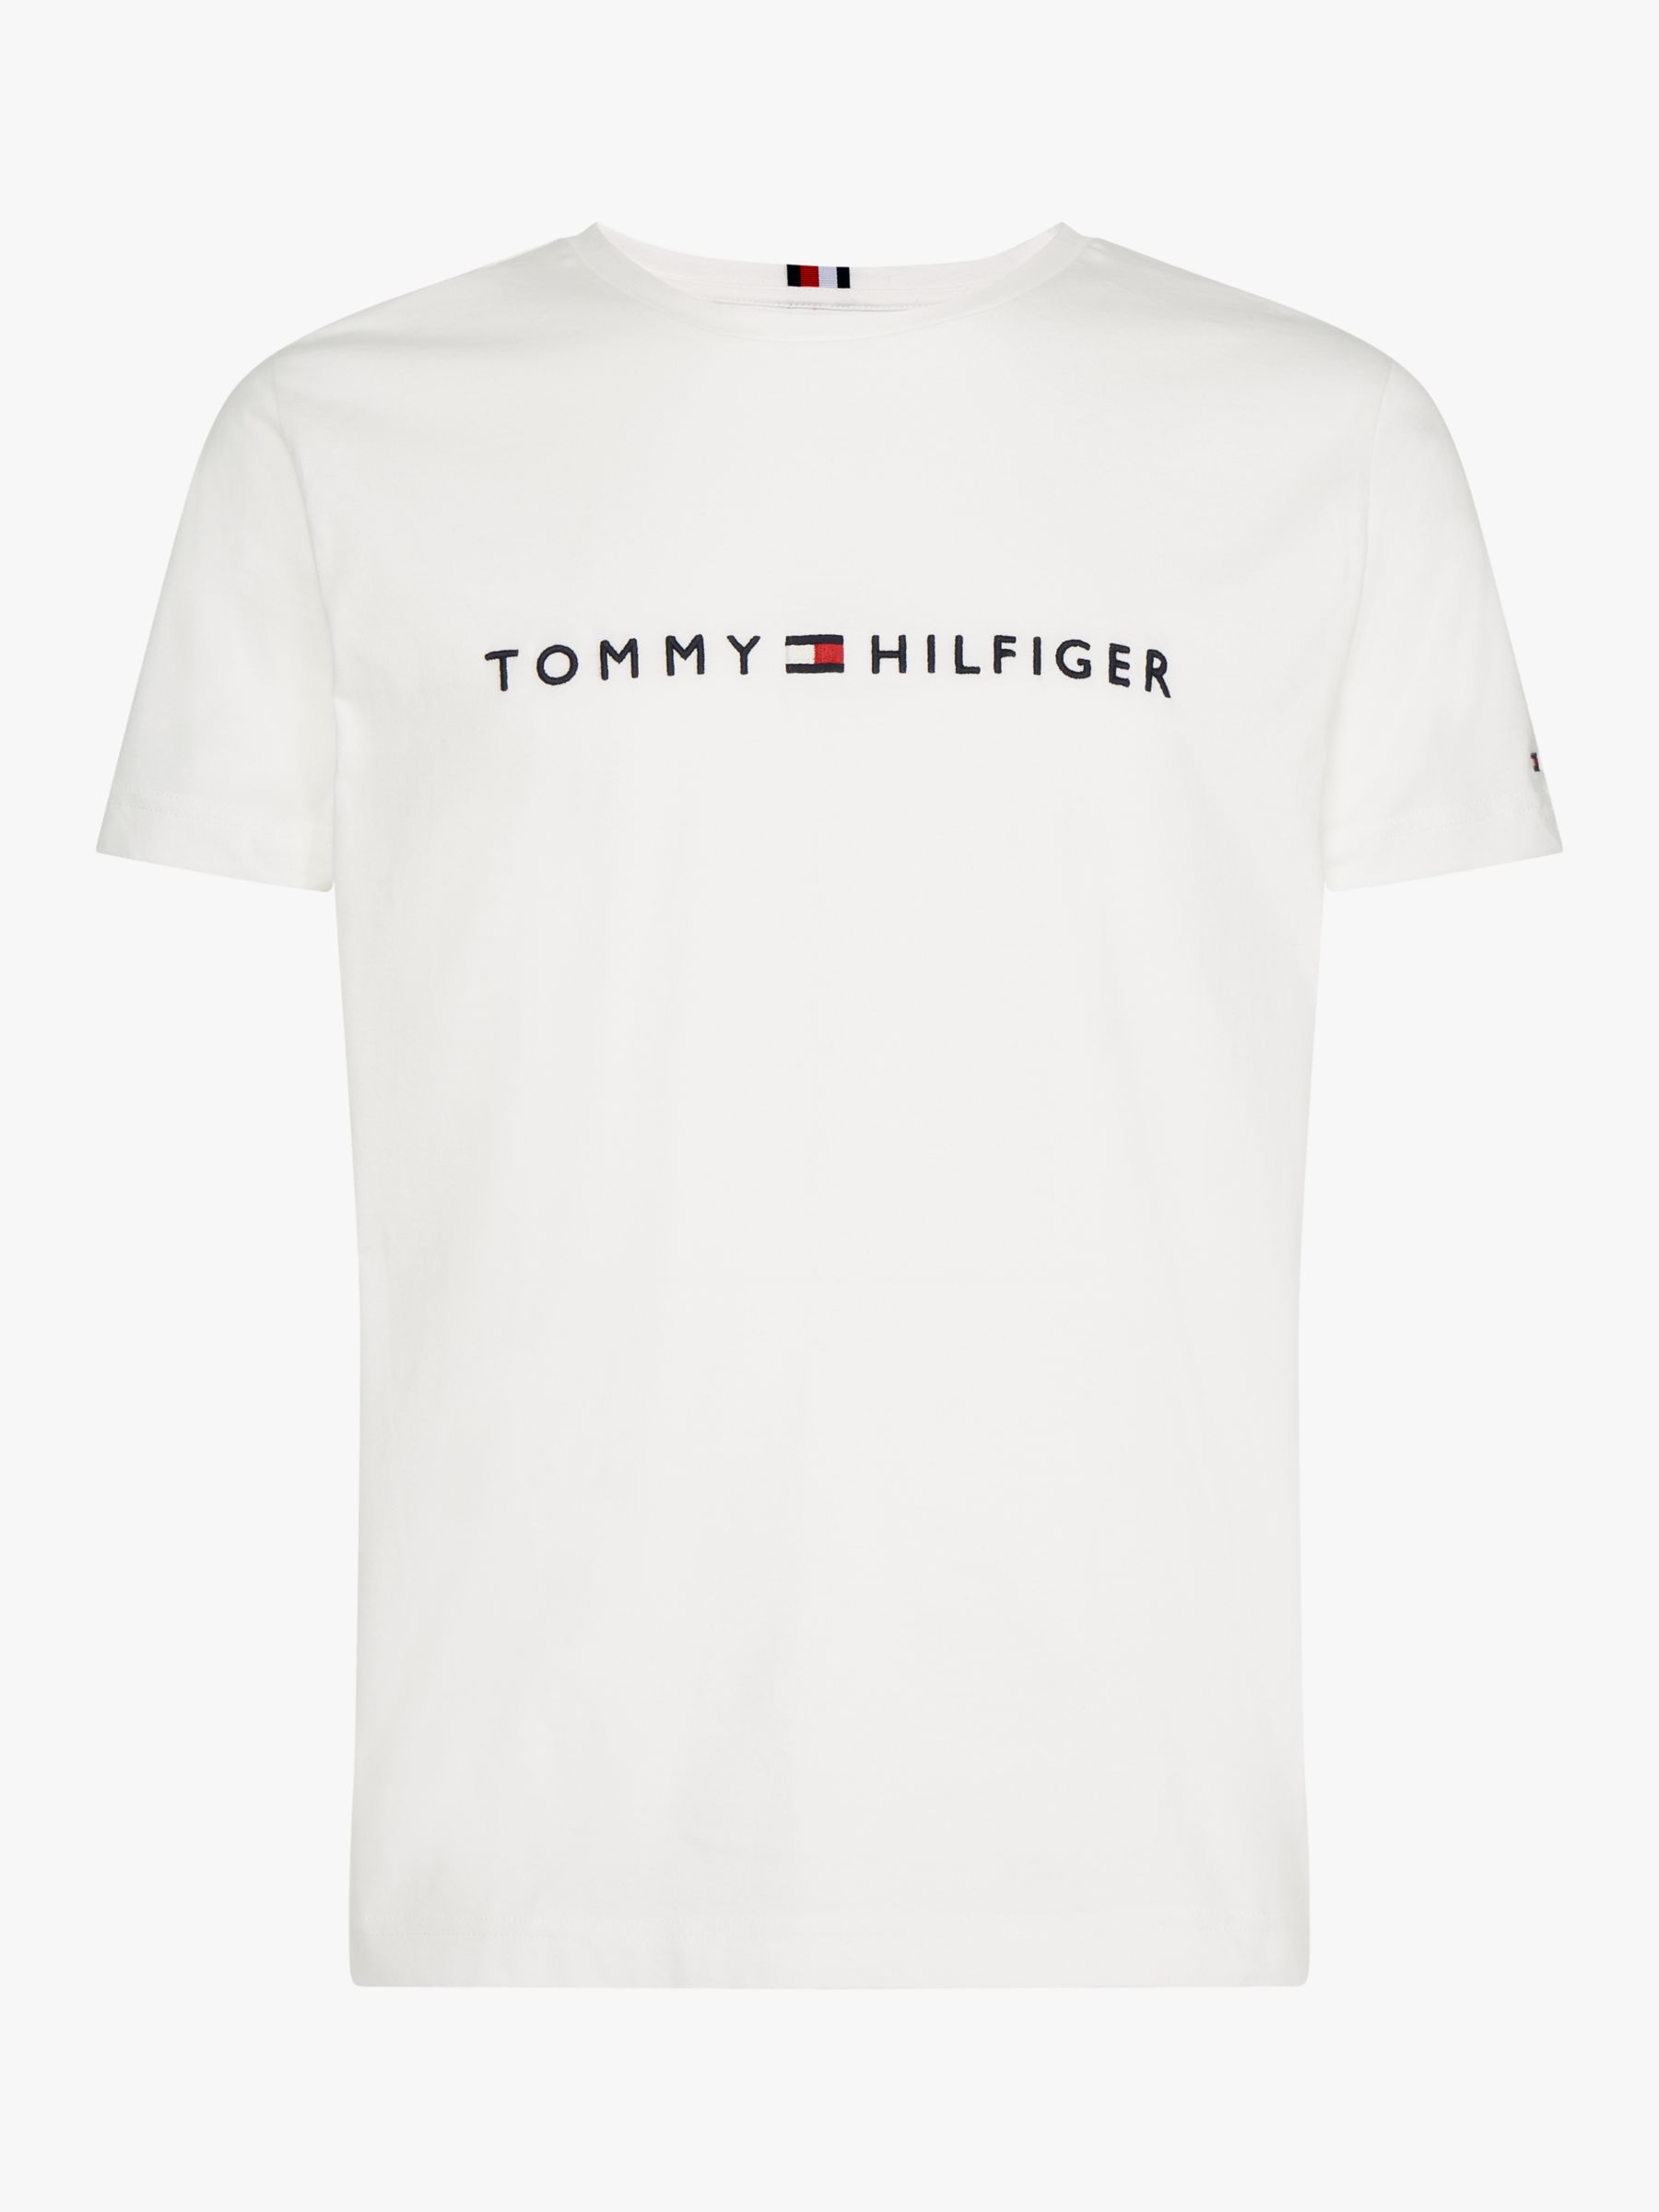 security second hand suddenly Tommy Hilfiger Men's T-Shirts | John Lewis & Partners